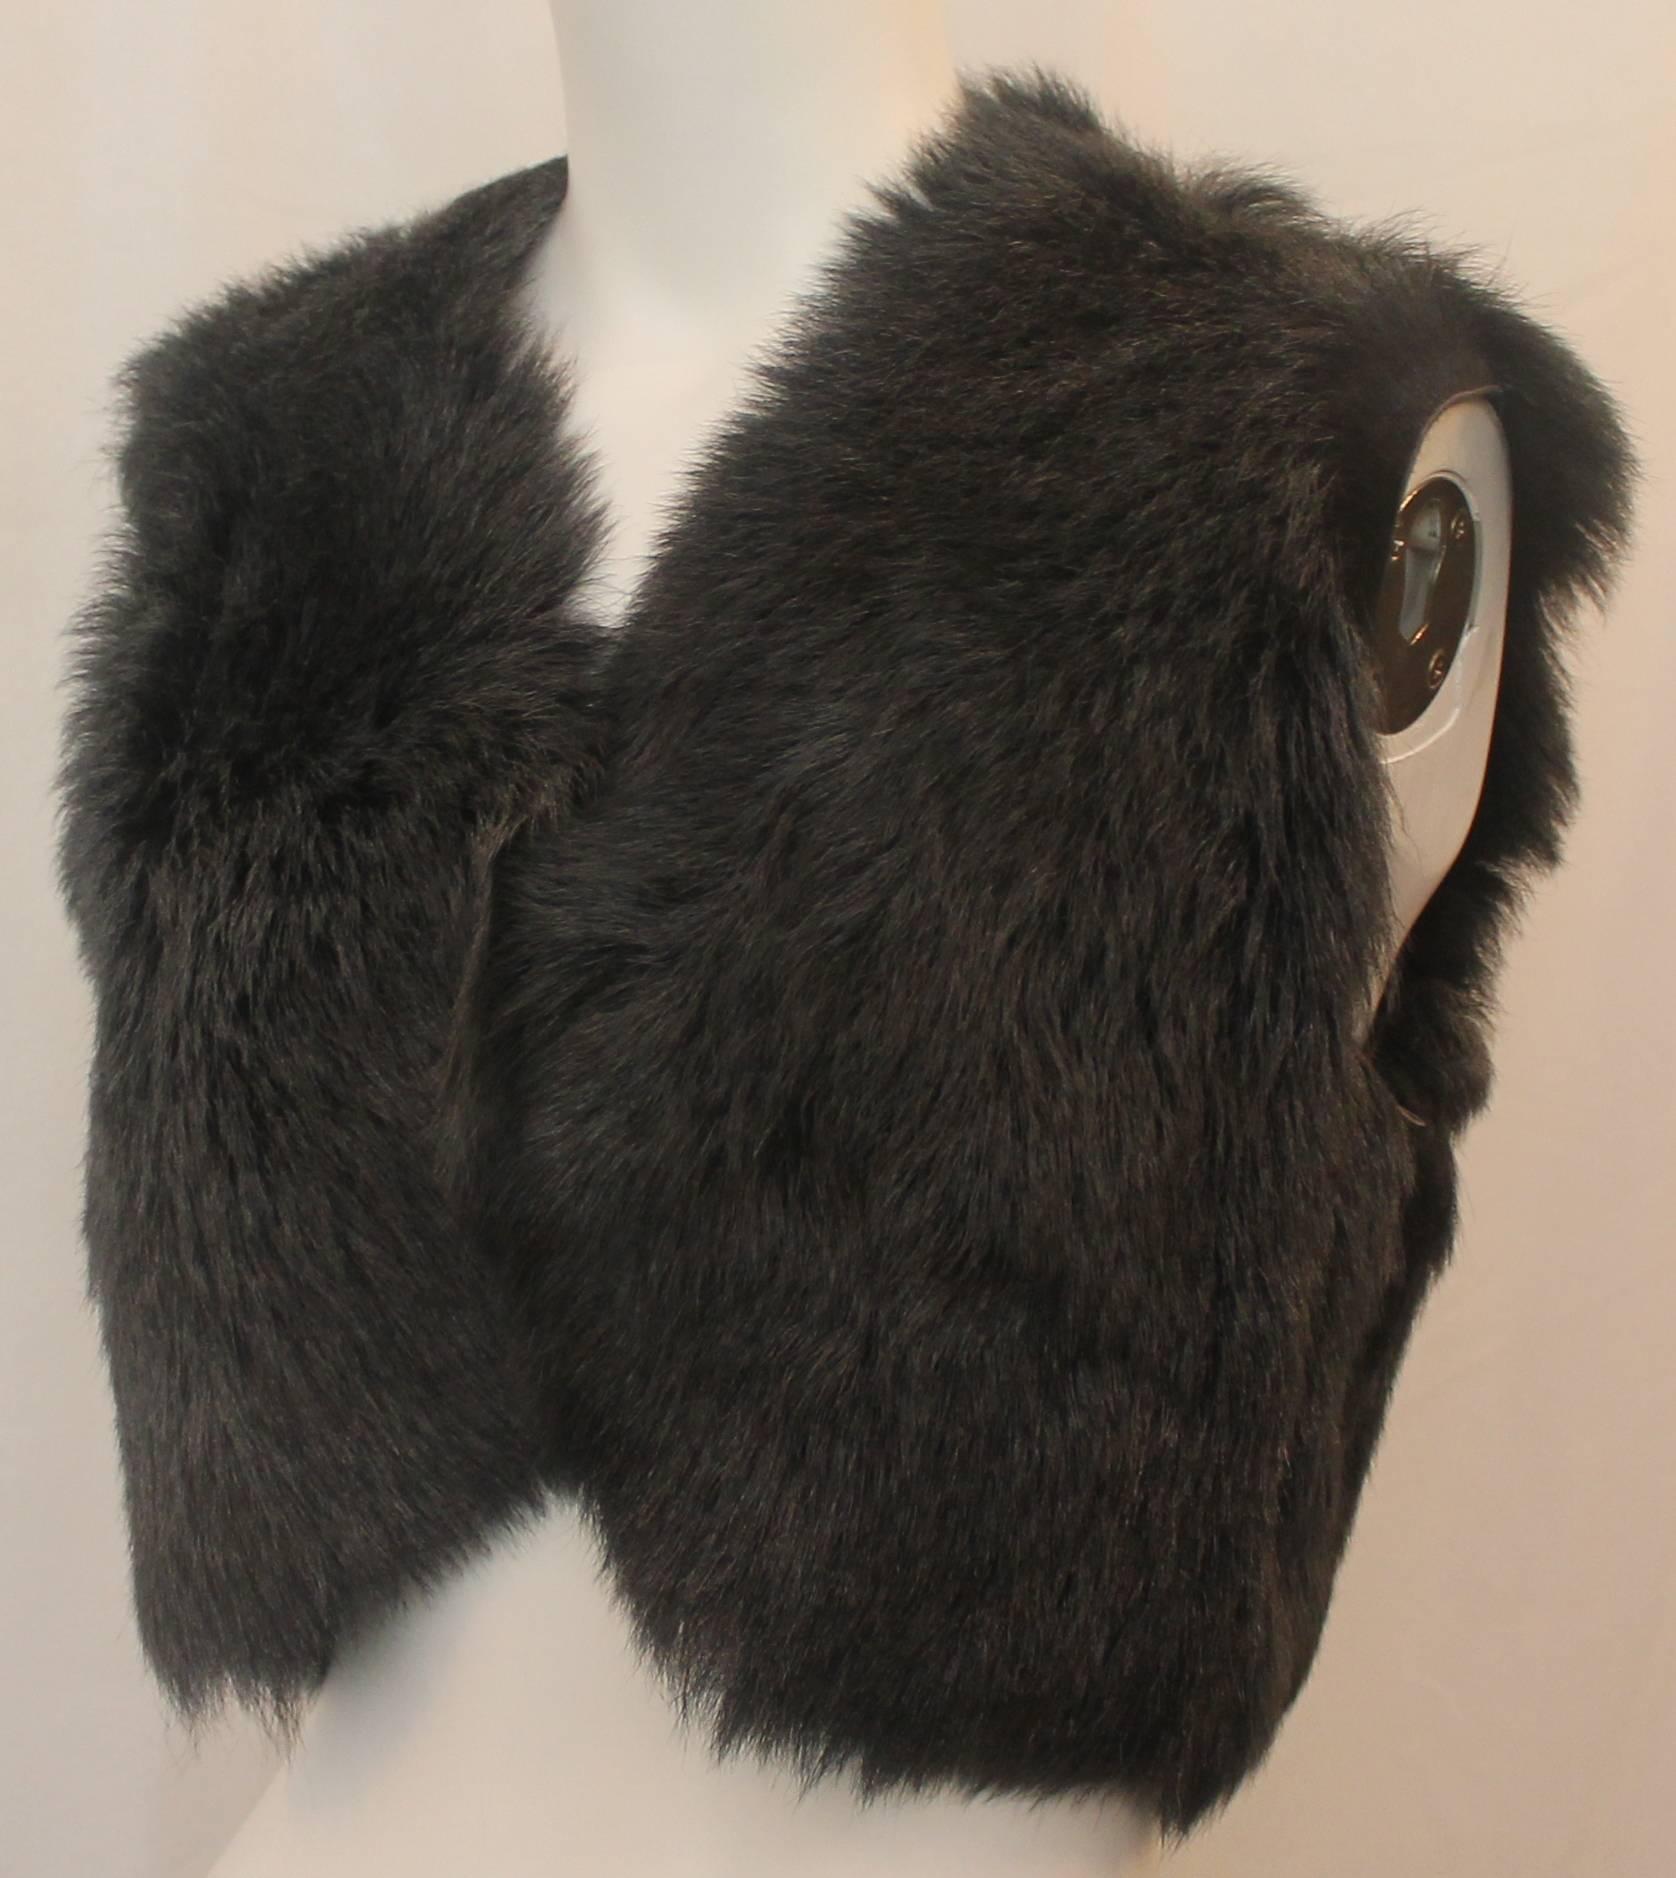 This Ralph Lauren black label grey shearling lamb vest is cropped and has one hook and eye closure in the front. Its lining is suede and the piece is in excellent condition with light wear consistent with use.

Measurements
Bust: 39